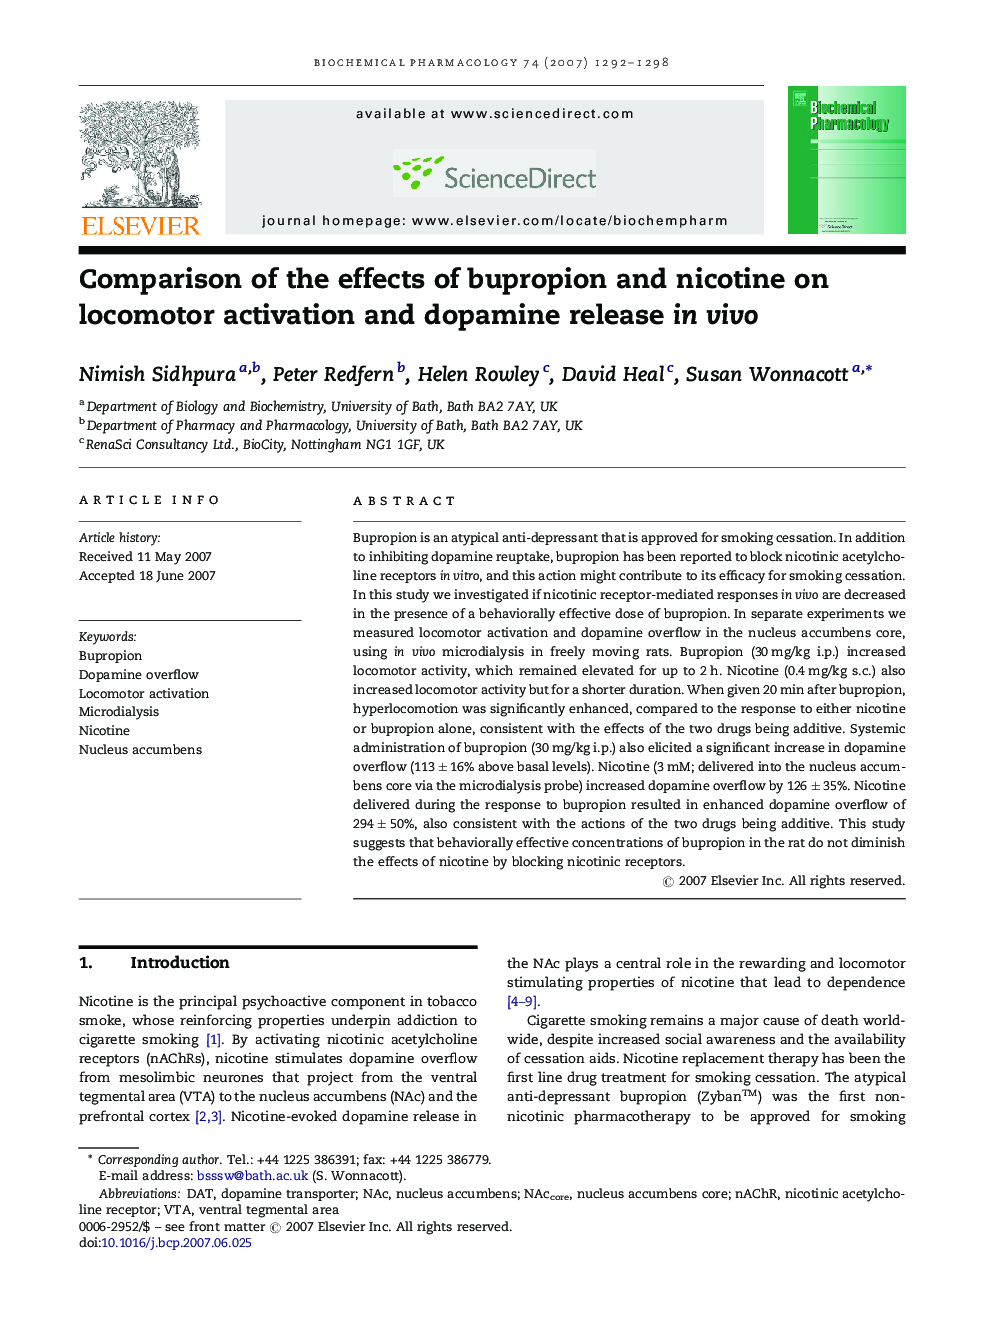 Comparison of the effects of bupropion and nicotine on locomotor activation and dopamine release in vivo